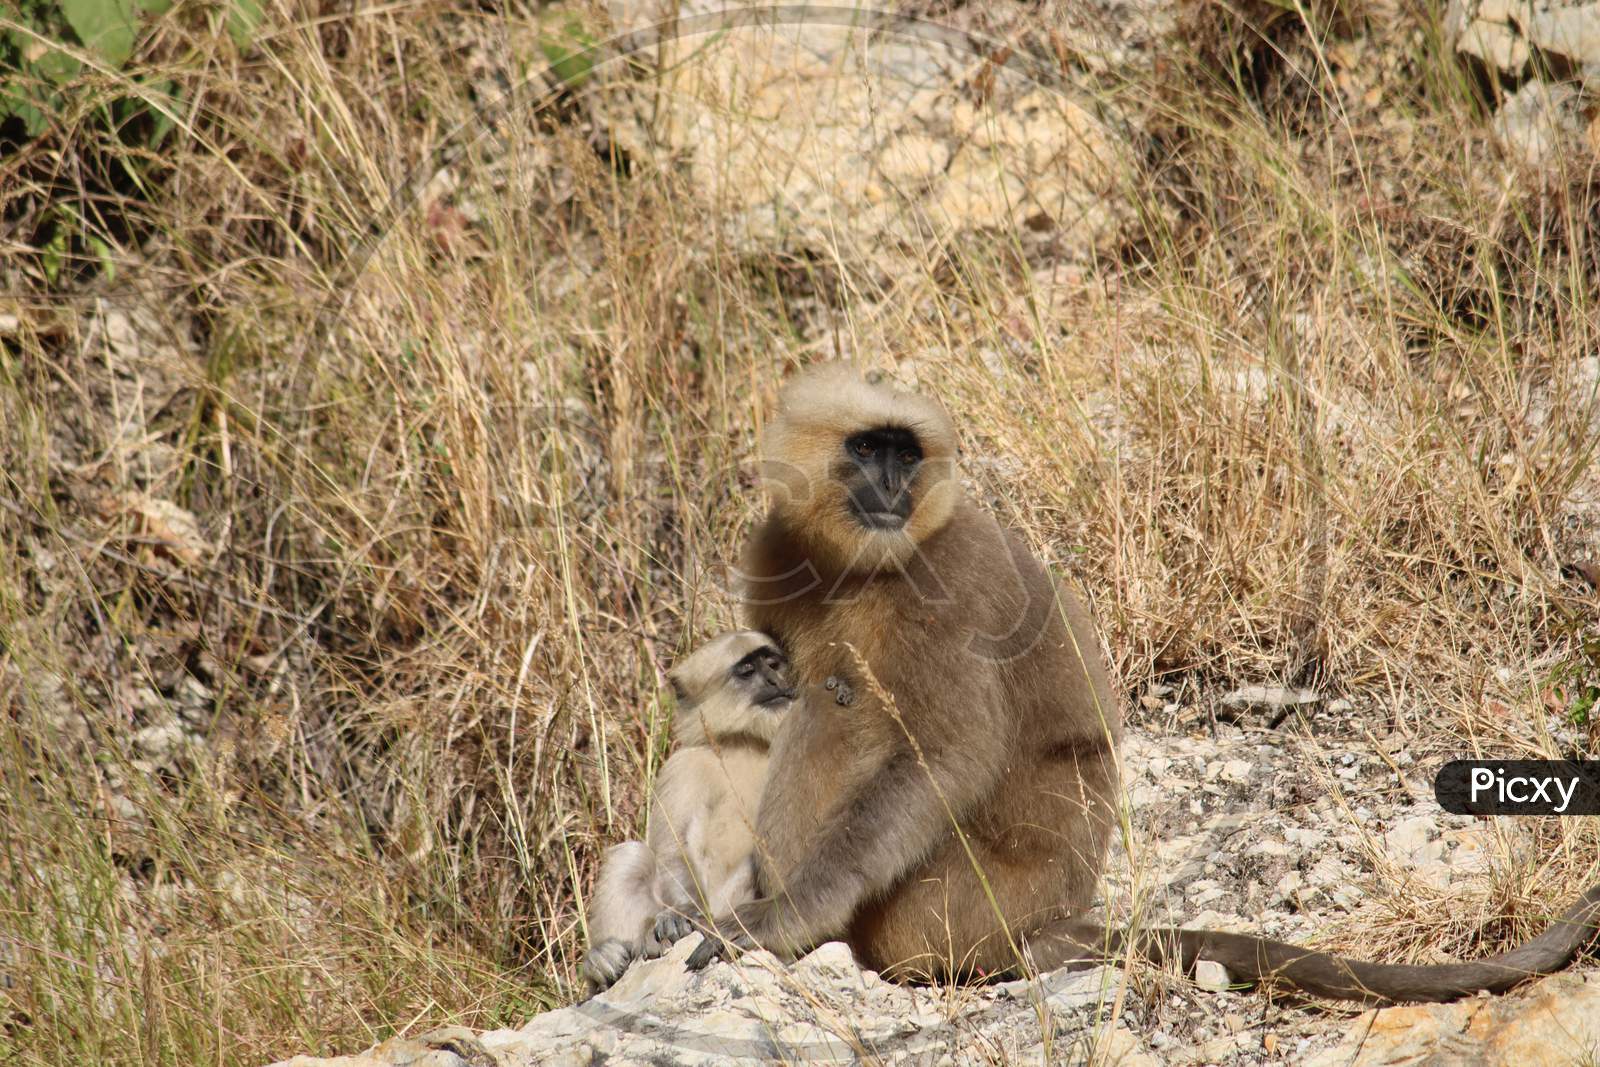 Baboon taking care of her baby